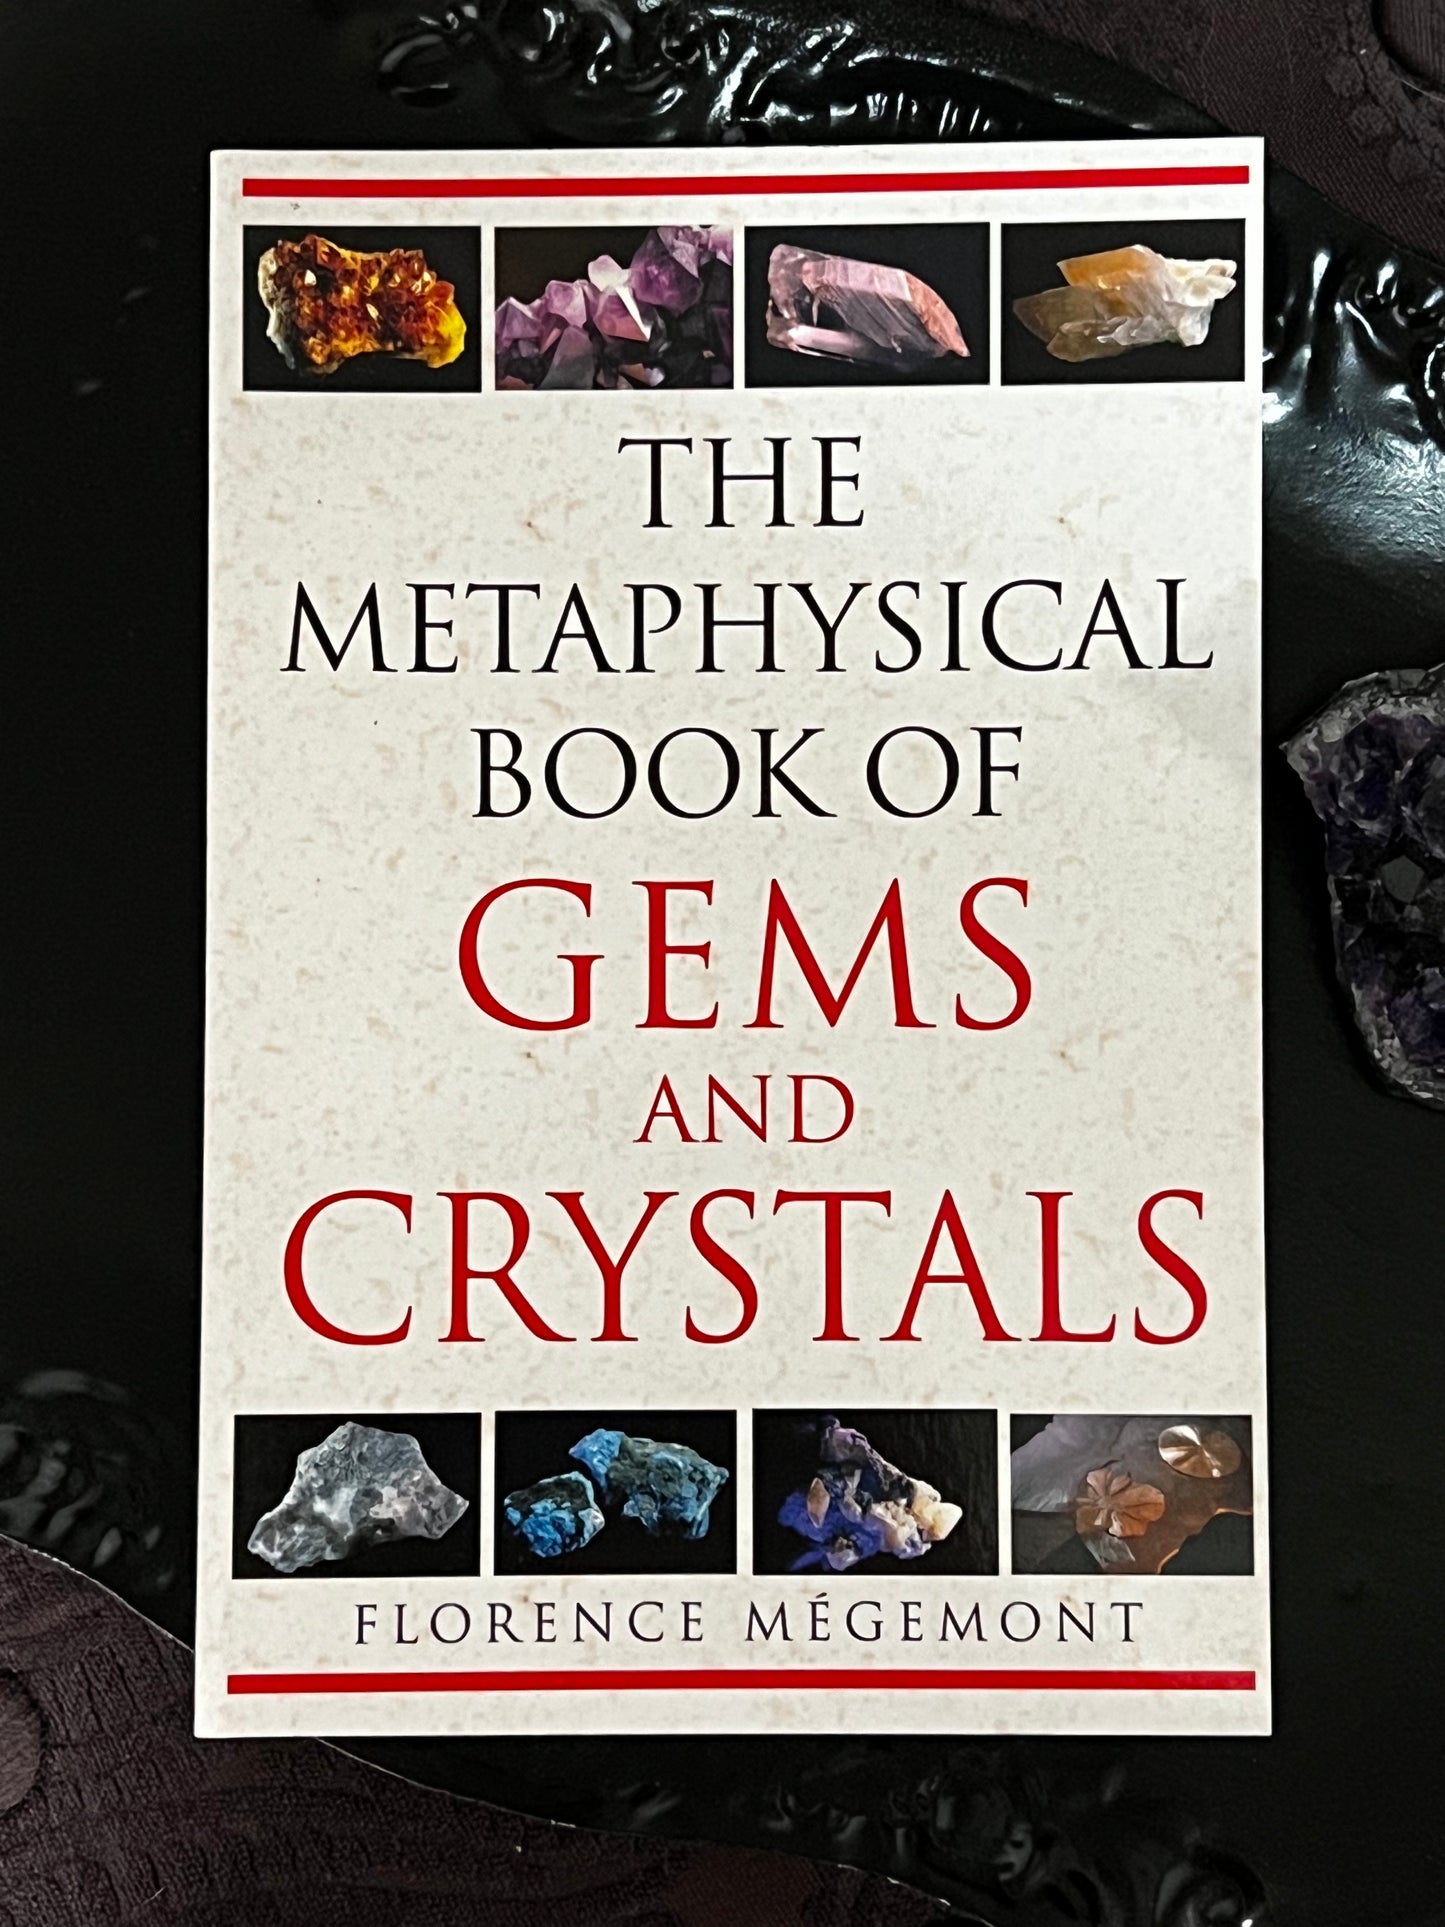 The Metaphysical Book Of Gems and Crystals